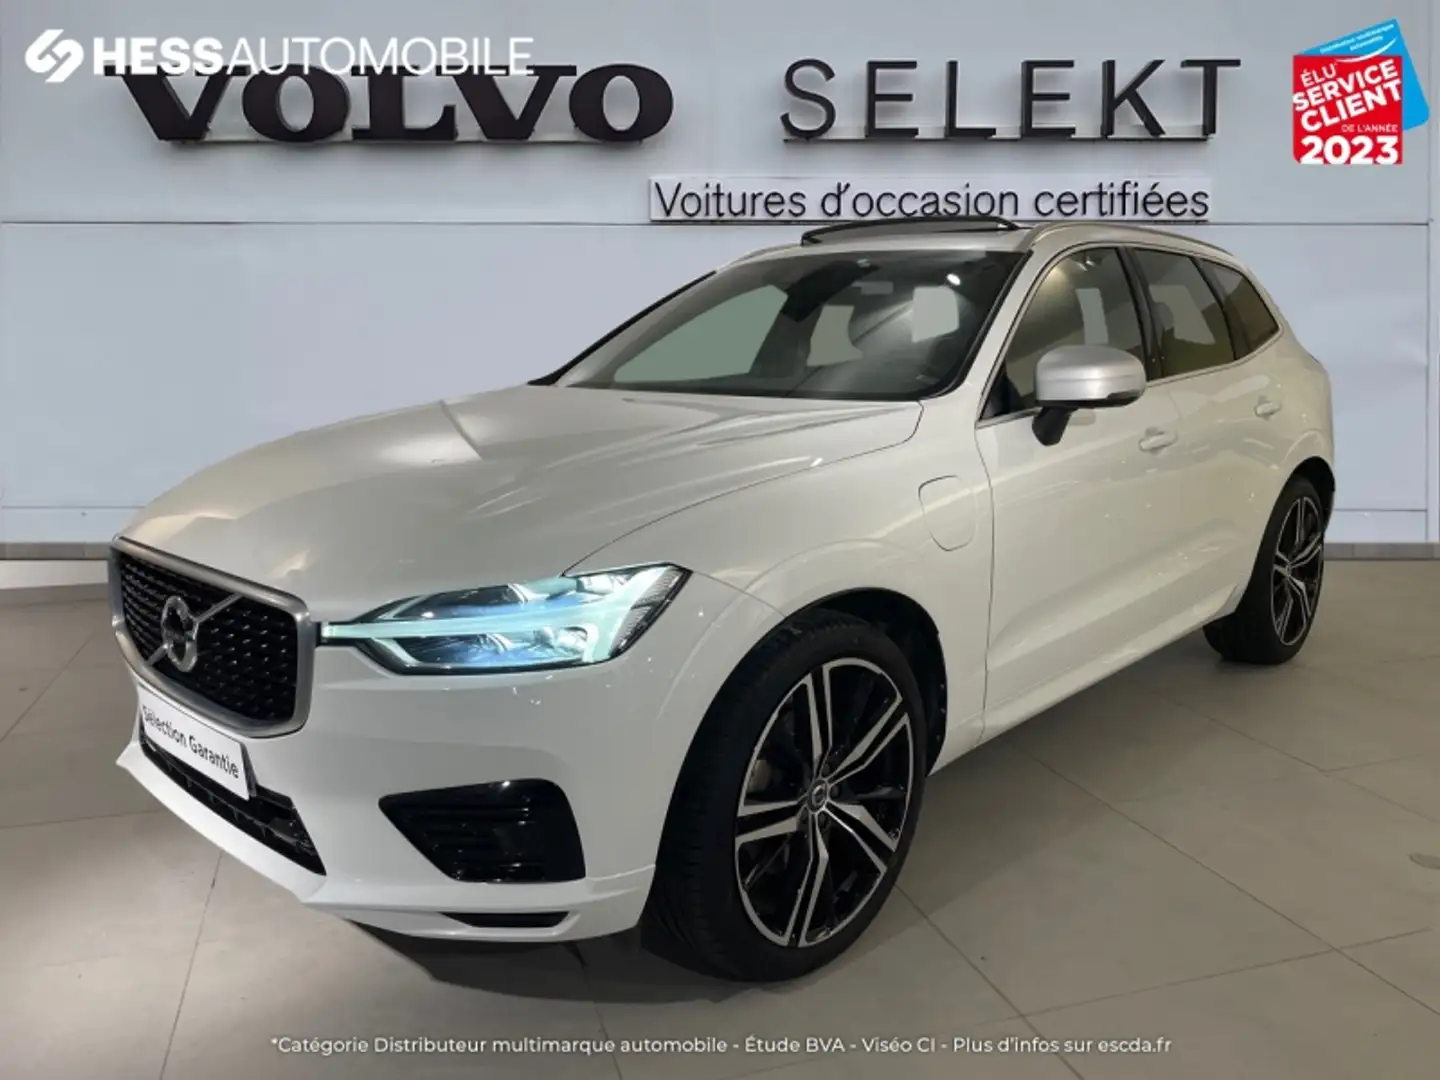 Volvo XC60 T8 Twin Engine 320 + 87ch R-Design Geartronic - 1